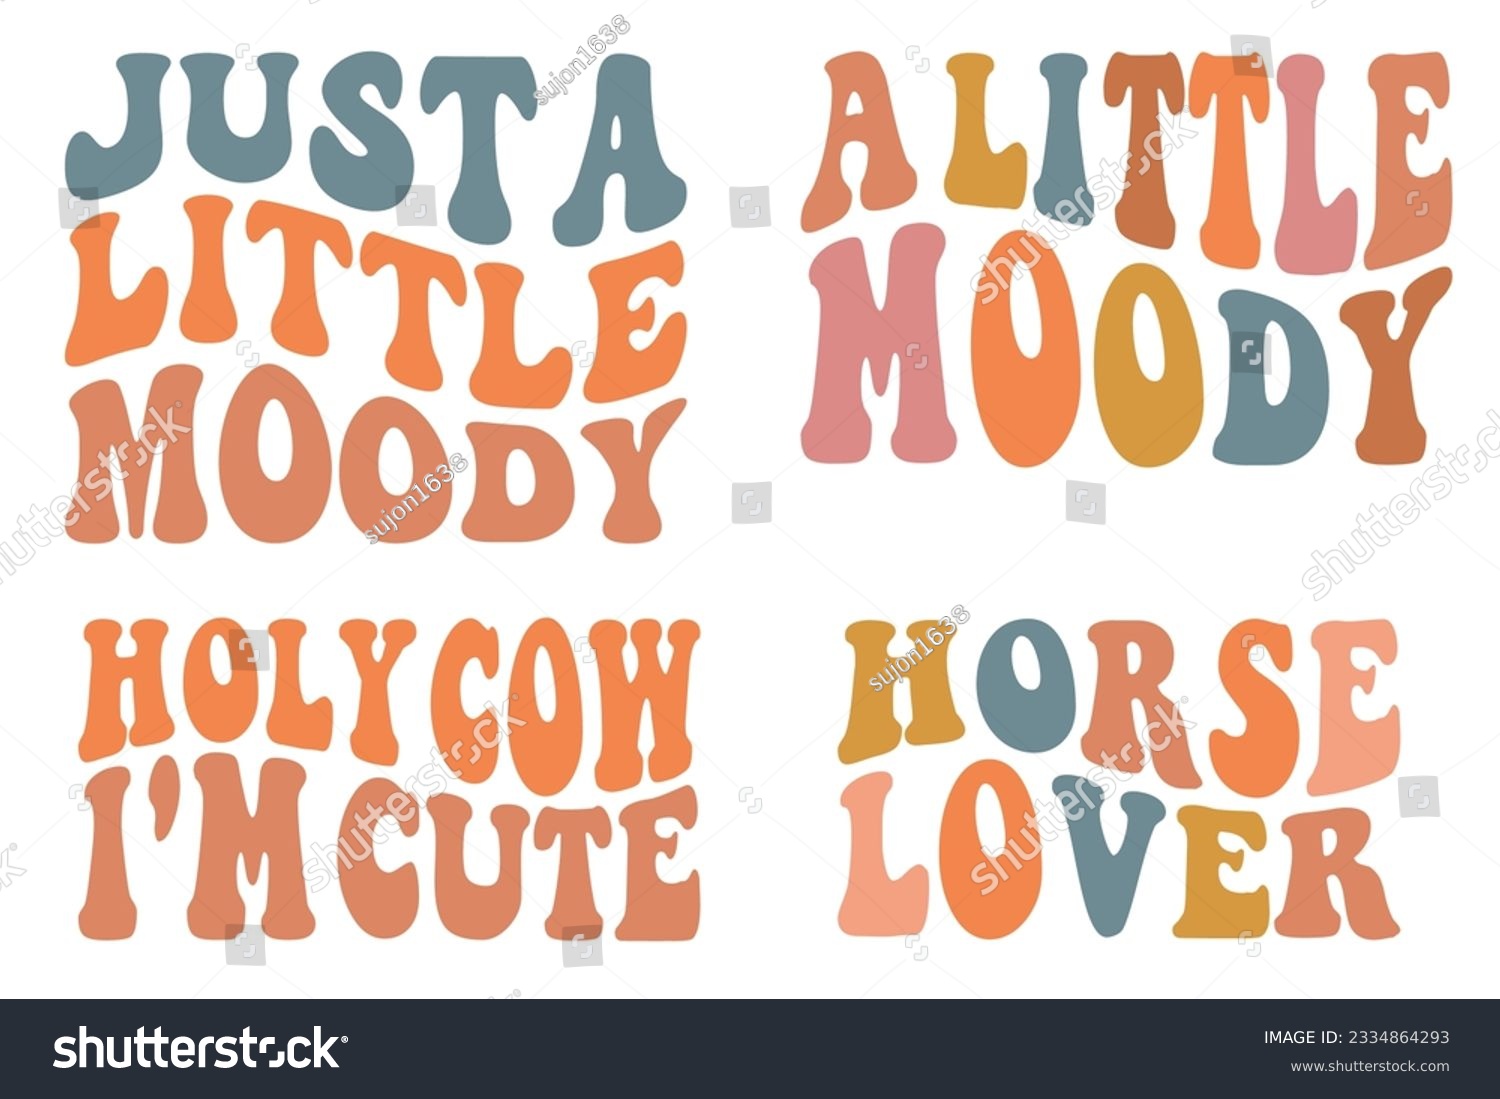 SVG of Just A Little Moody, A Little Moody, Holy Cow I'm Cute, Horse Lover retro wavy SVG bundle T-shirt designs svg